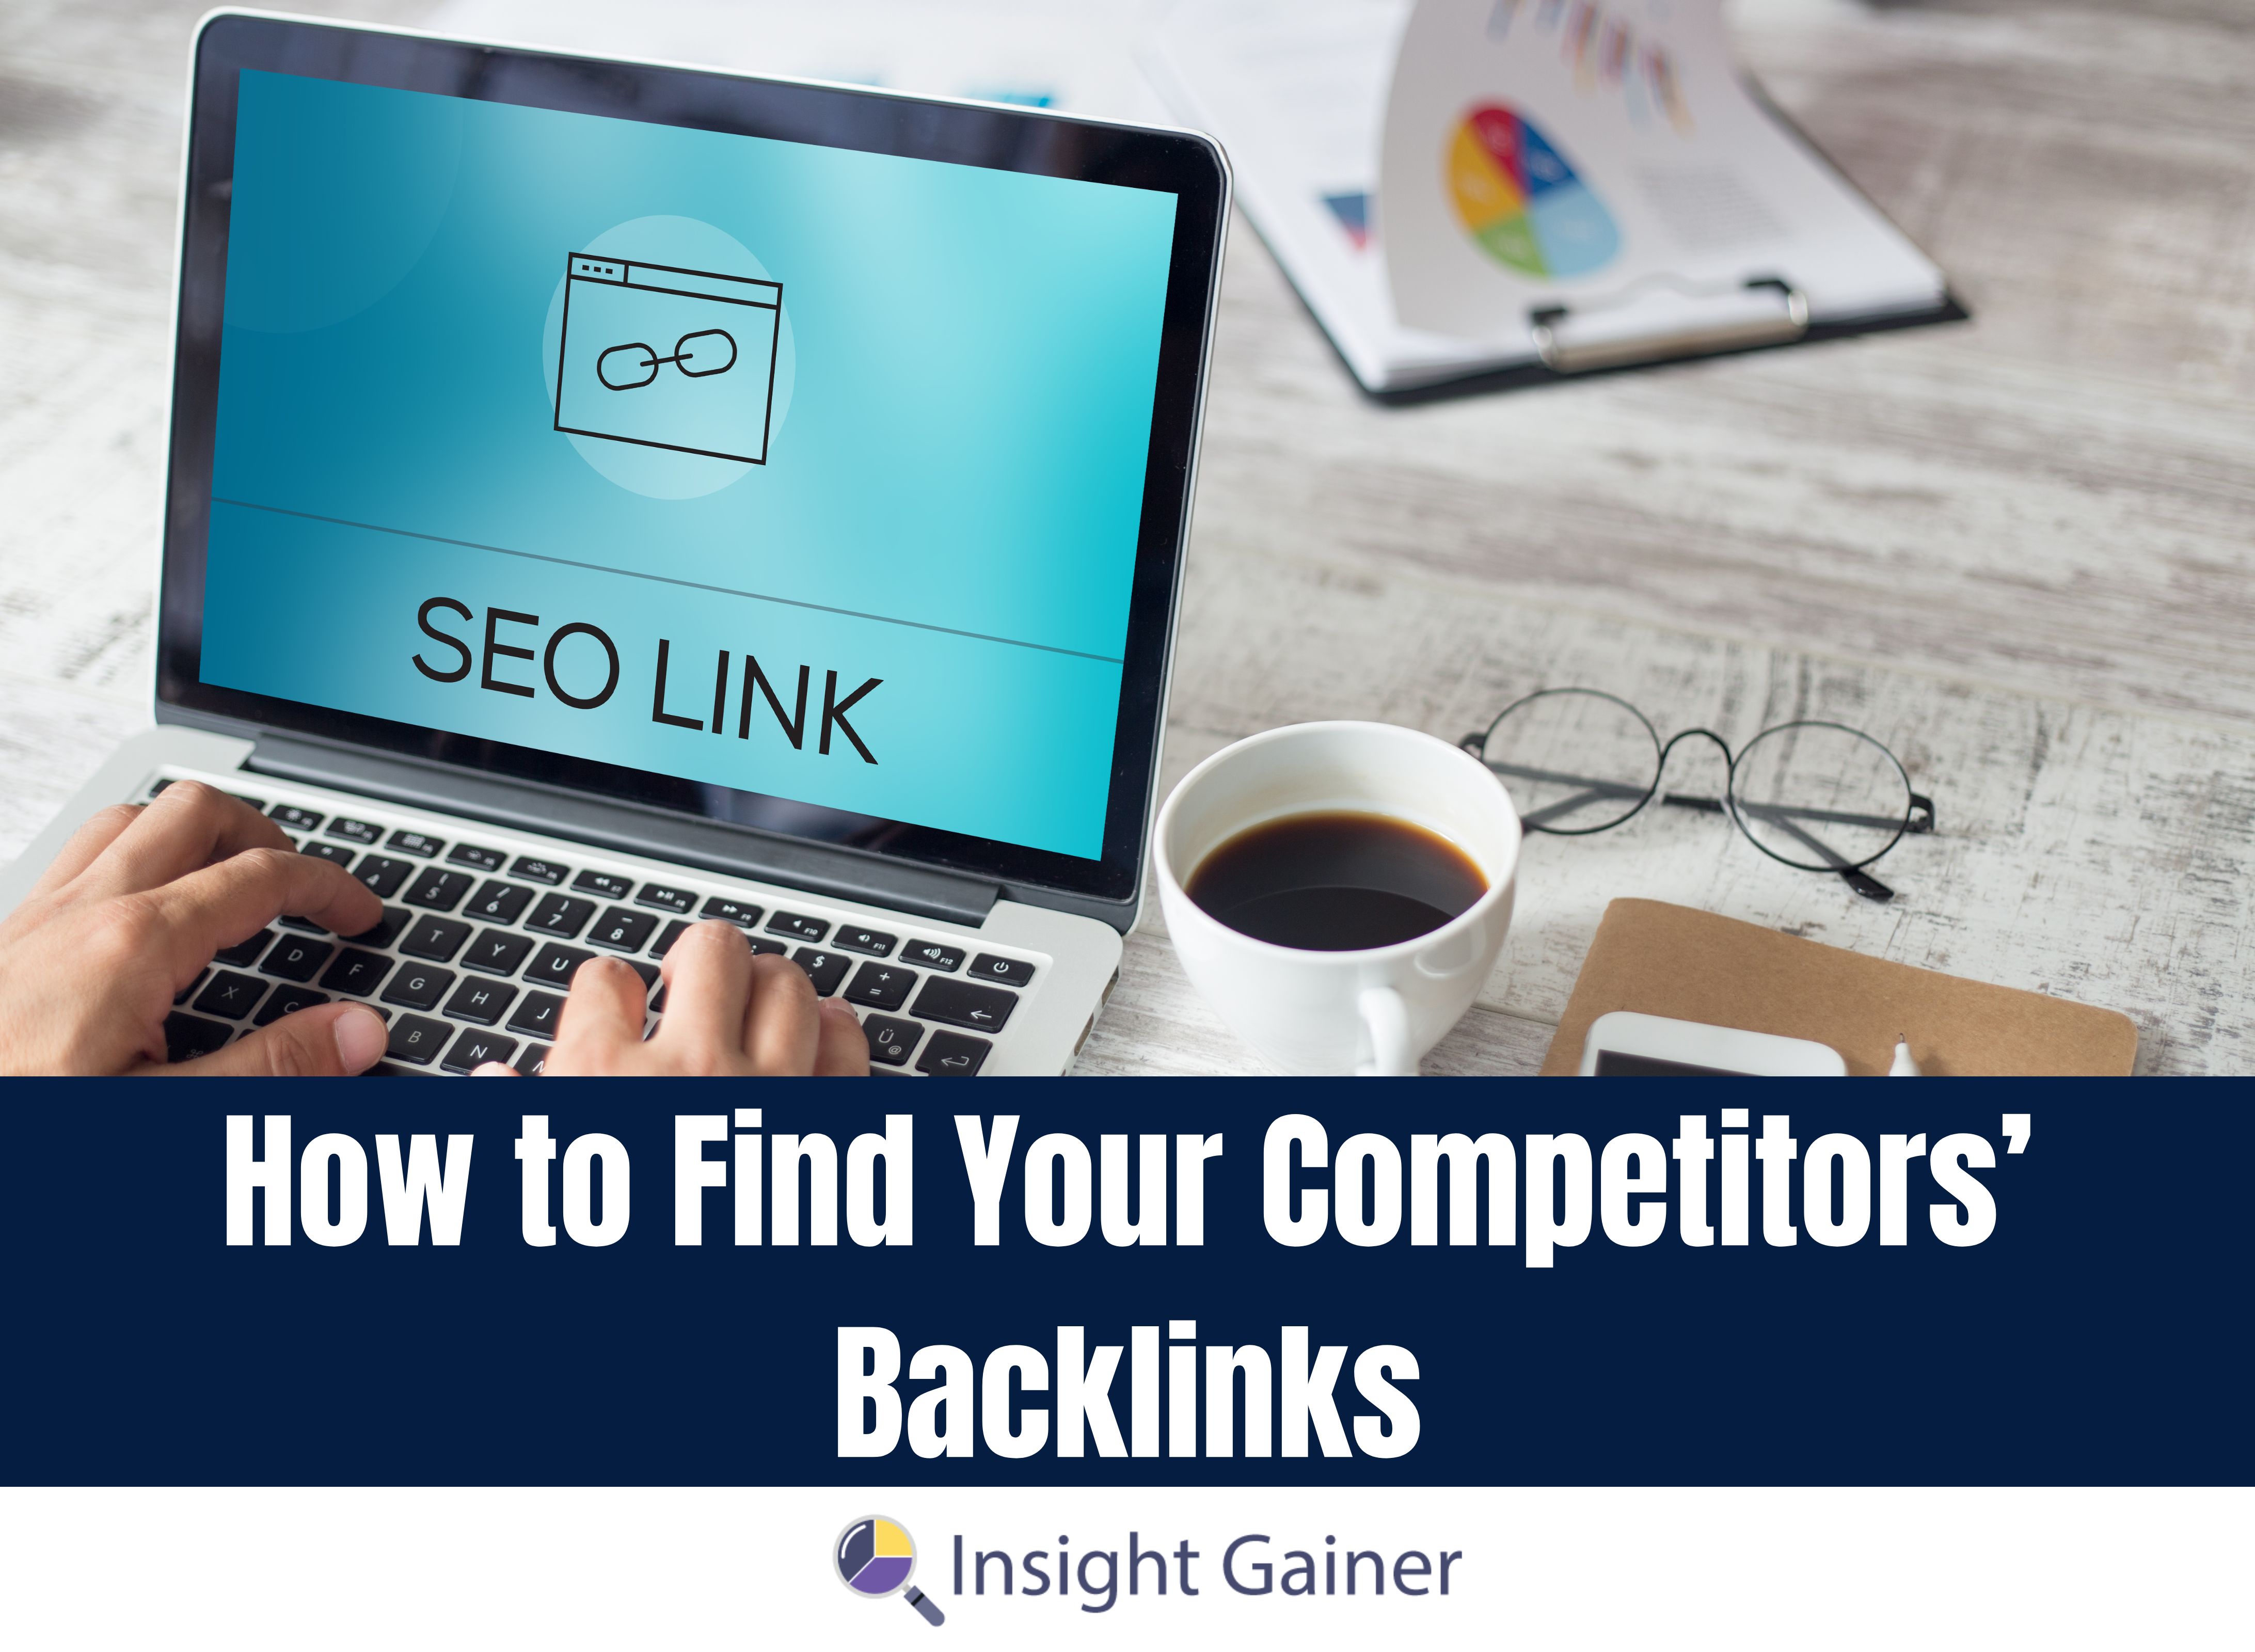 How to Find Your Competitors Backlinks